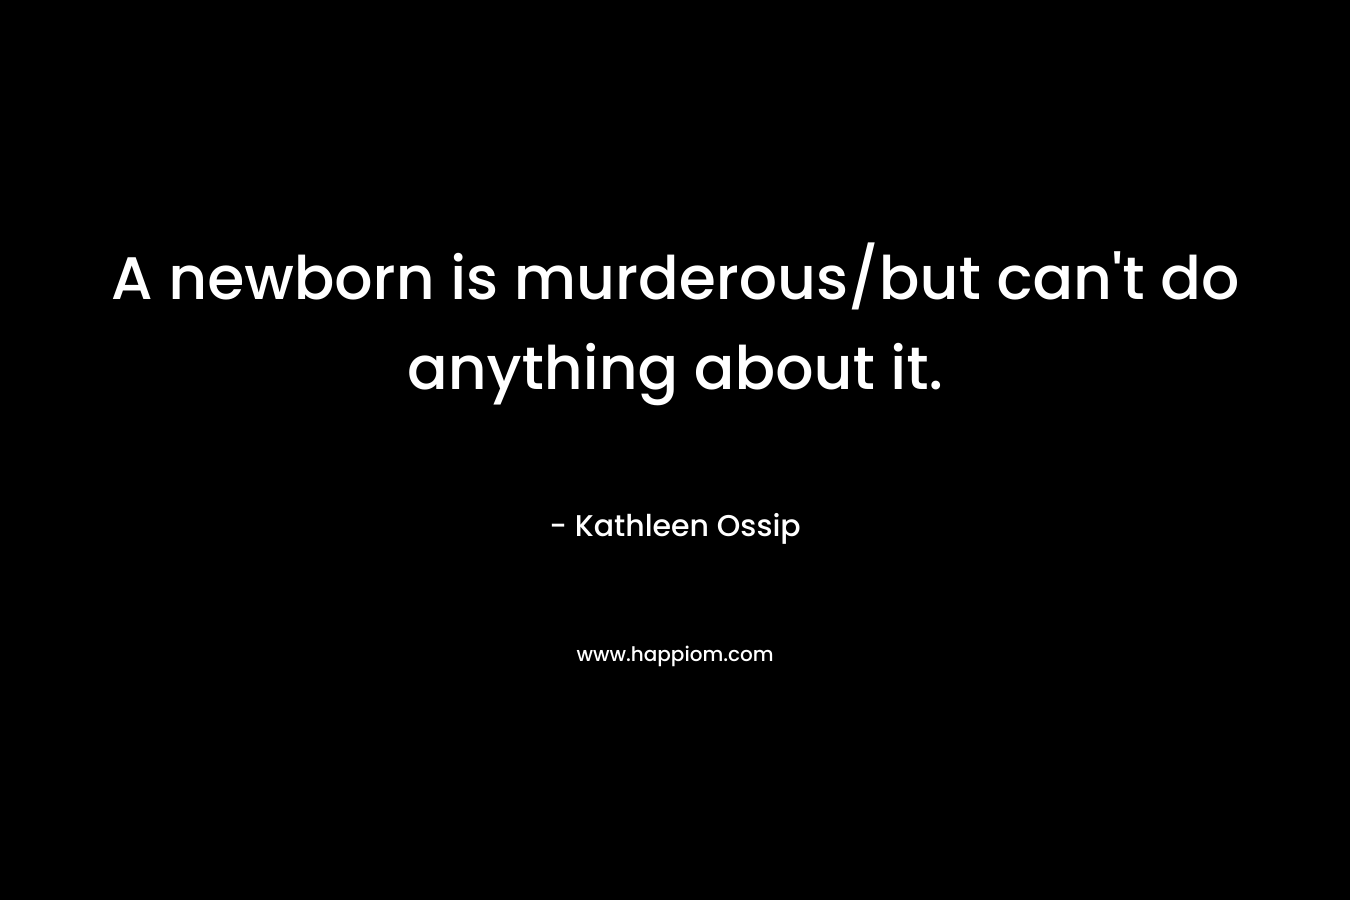 A newborn is murderous/but can’t do anything about it. – Kathleen Ossip